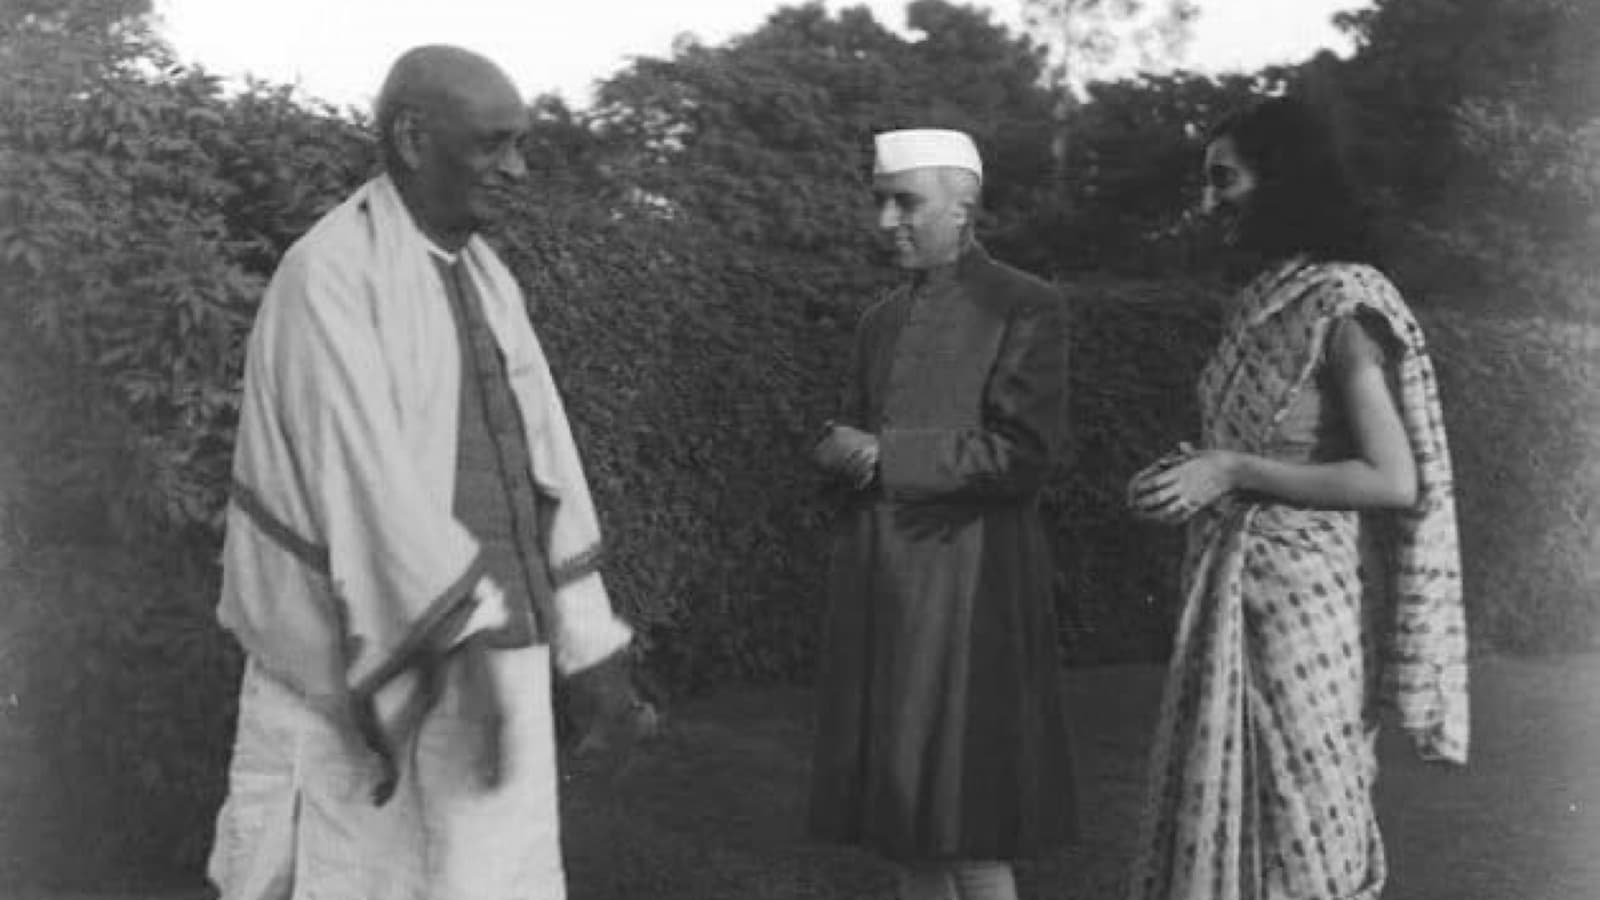 When Sardar Patel appealed people not to attack defenceless Muslims